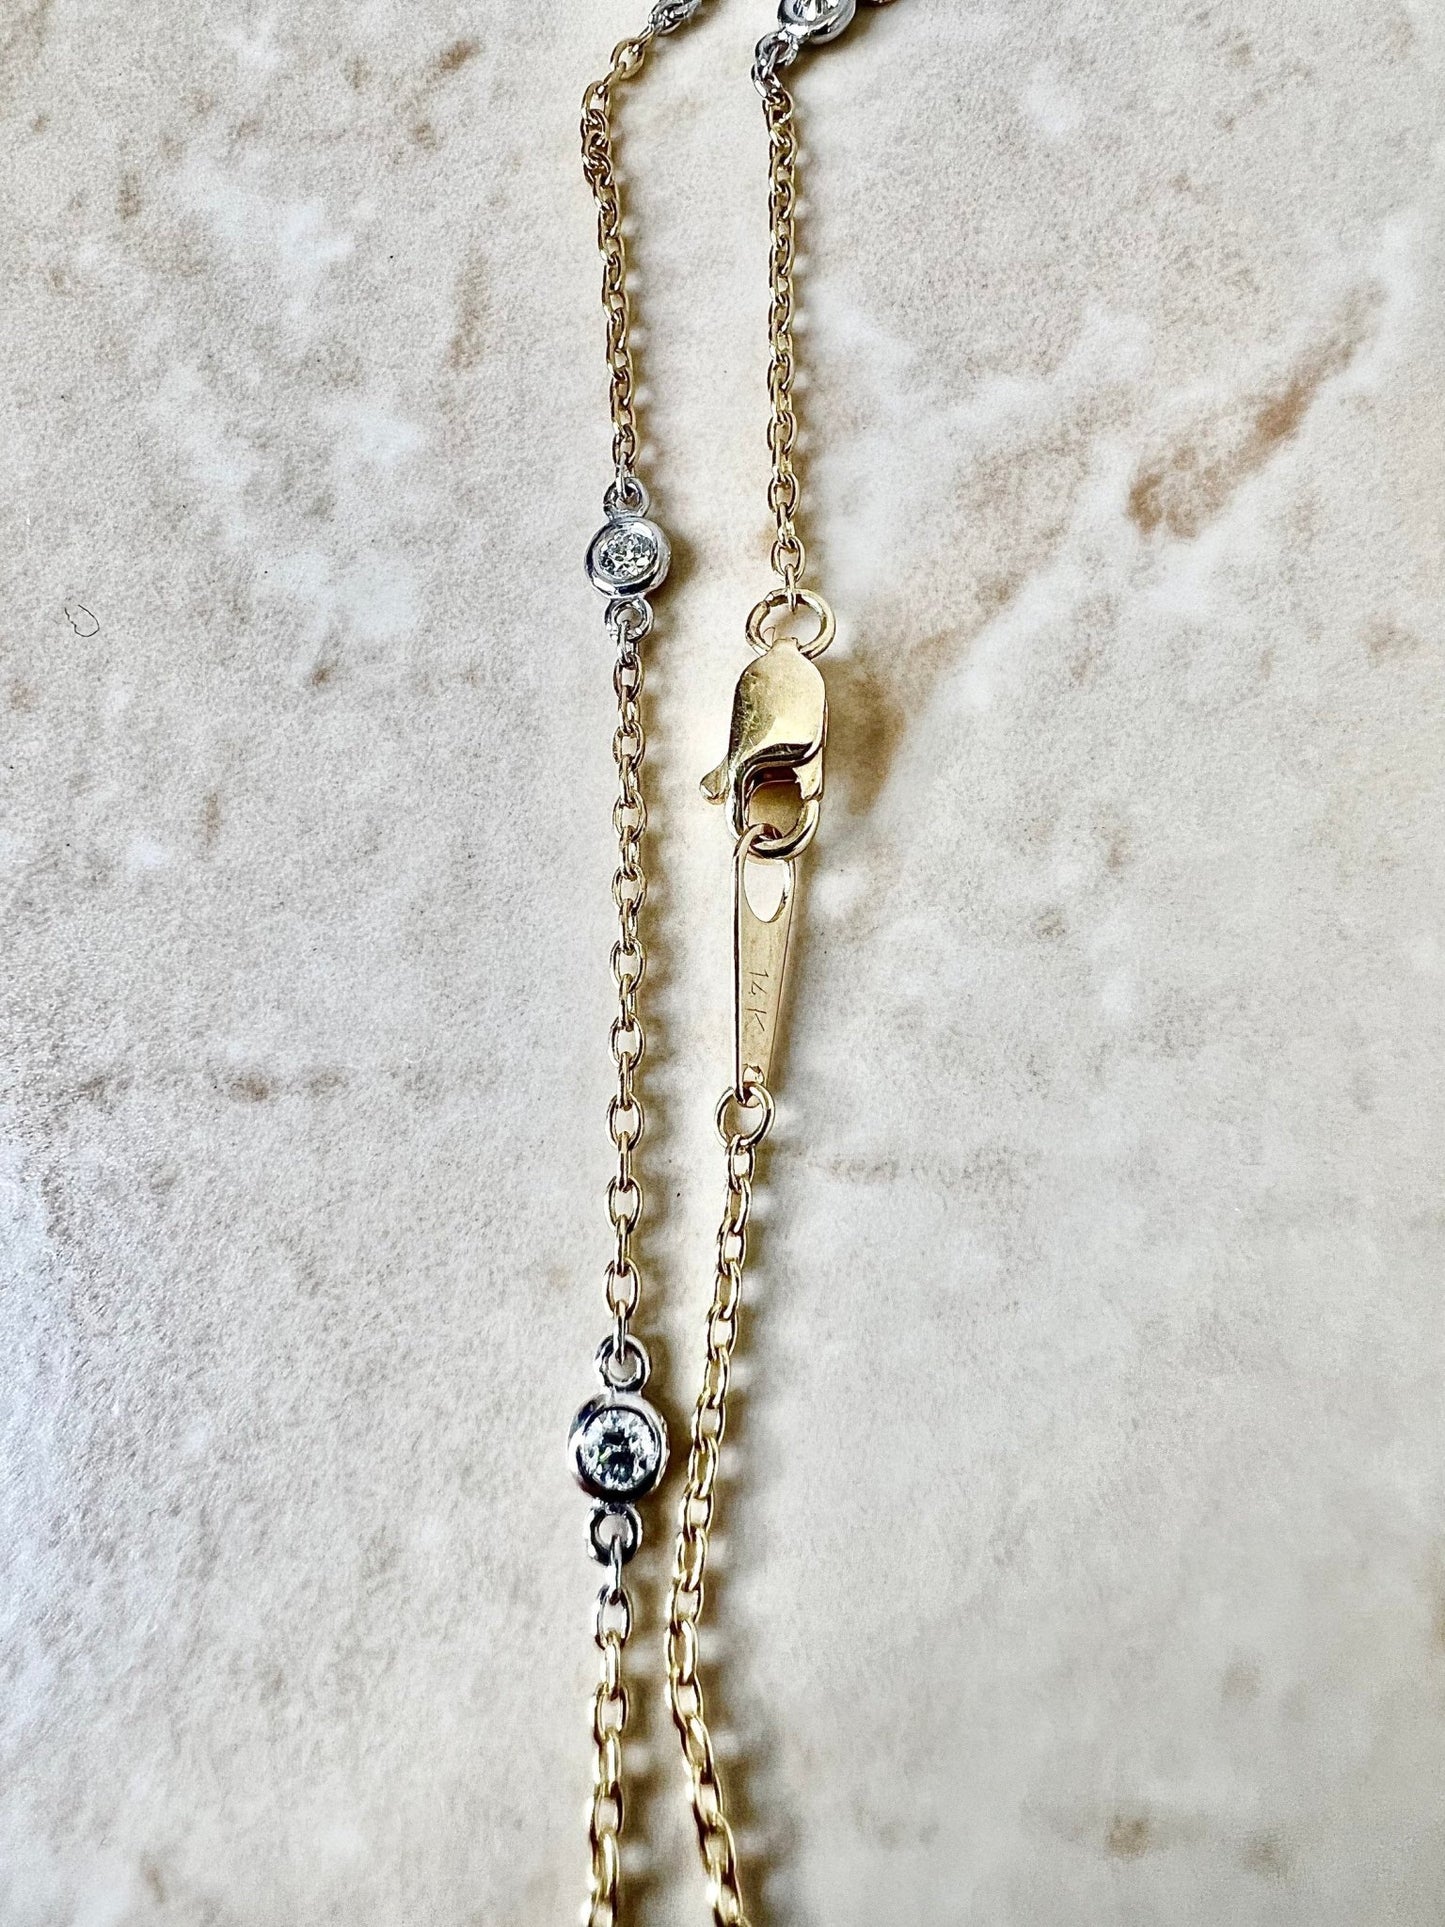 1/2 CTTW Diamond By The Yard Necklace - Diamond Station Necklace - 14 Karat Two Tone Gold - Adjustable 16-18-20“ - Birthday Gift